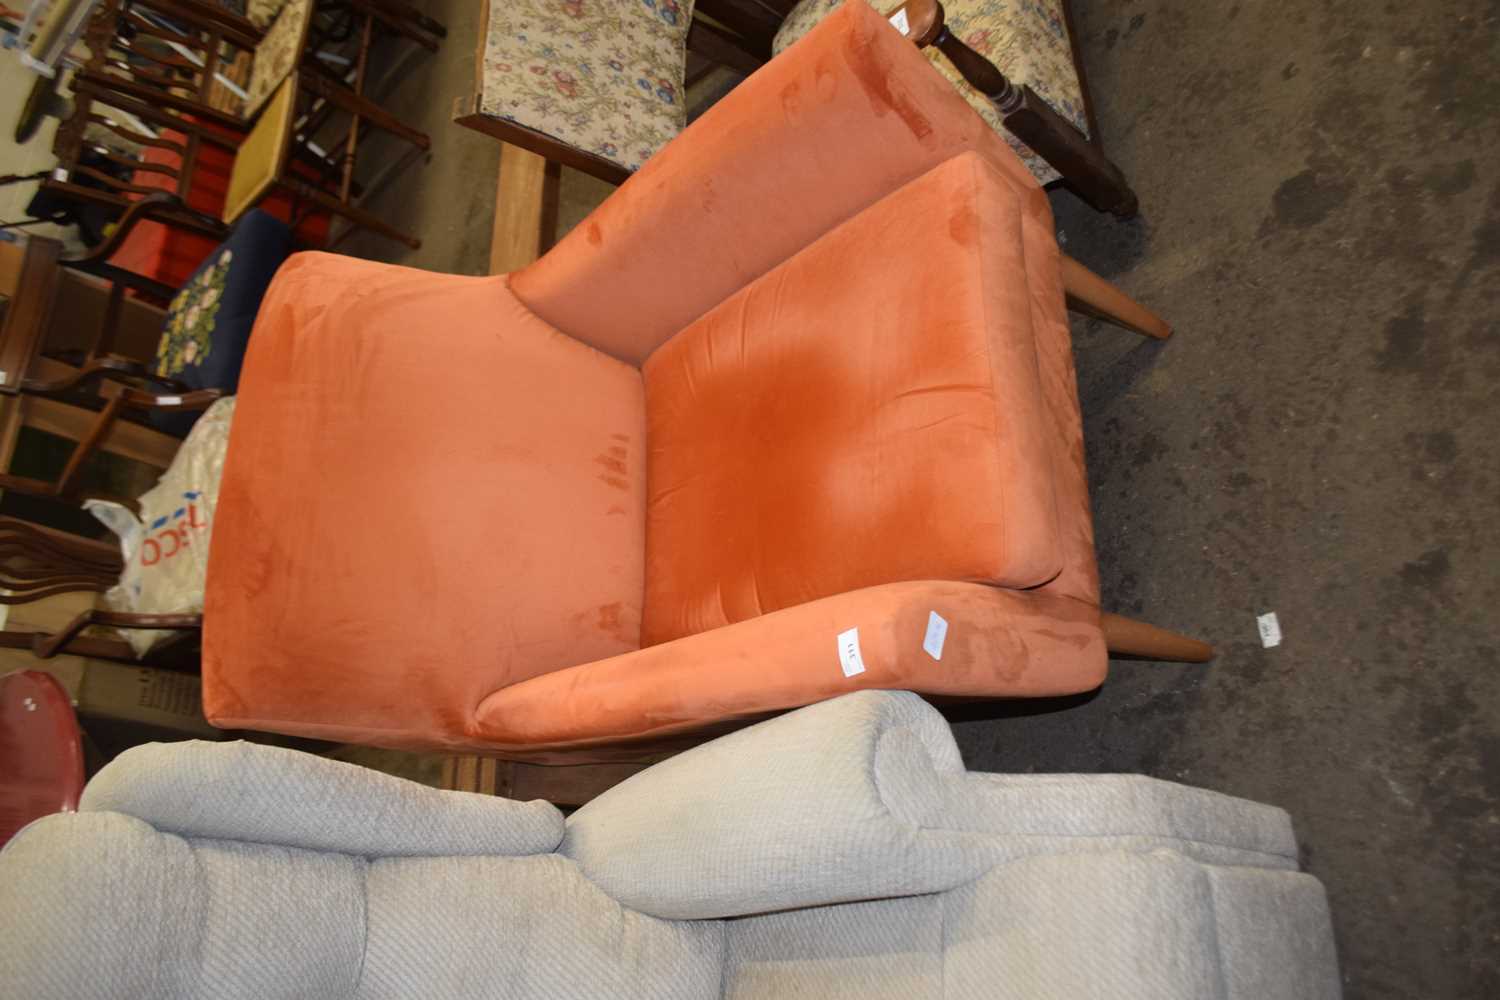 Further armchair with orange draylon covering